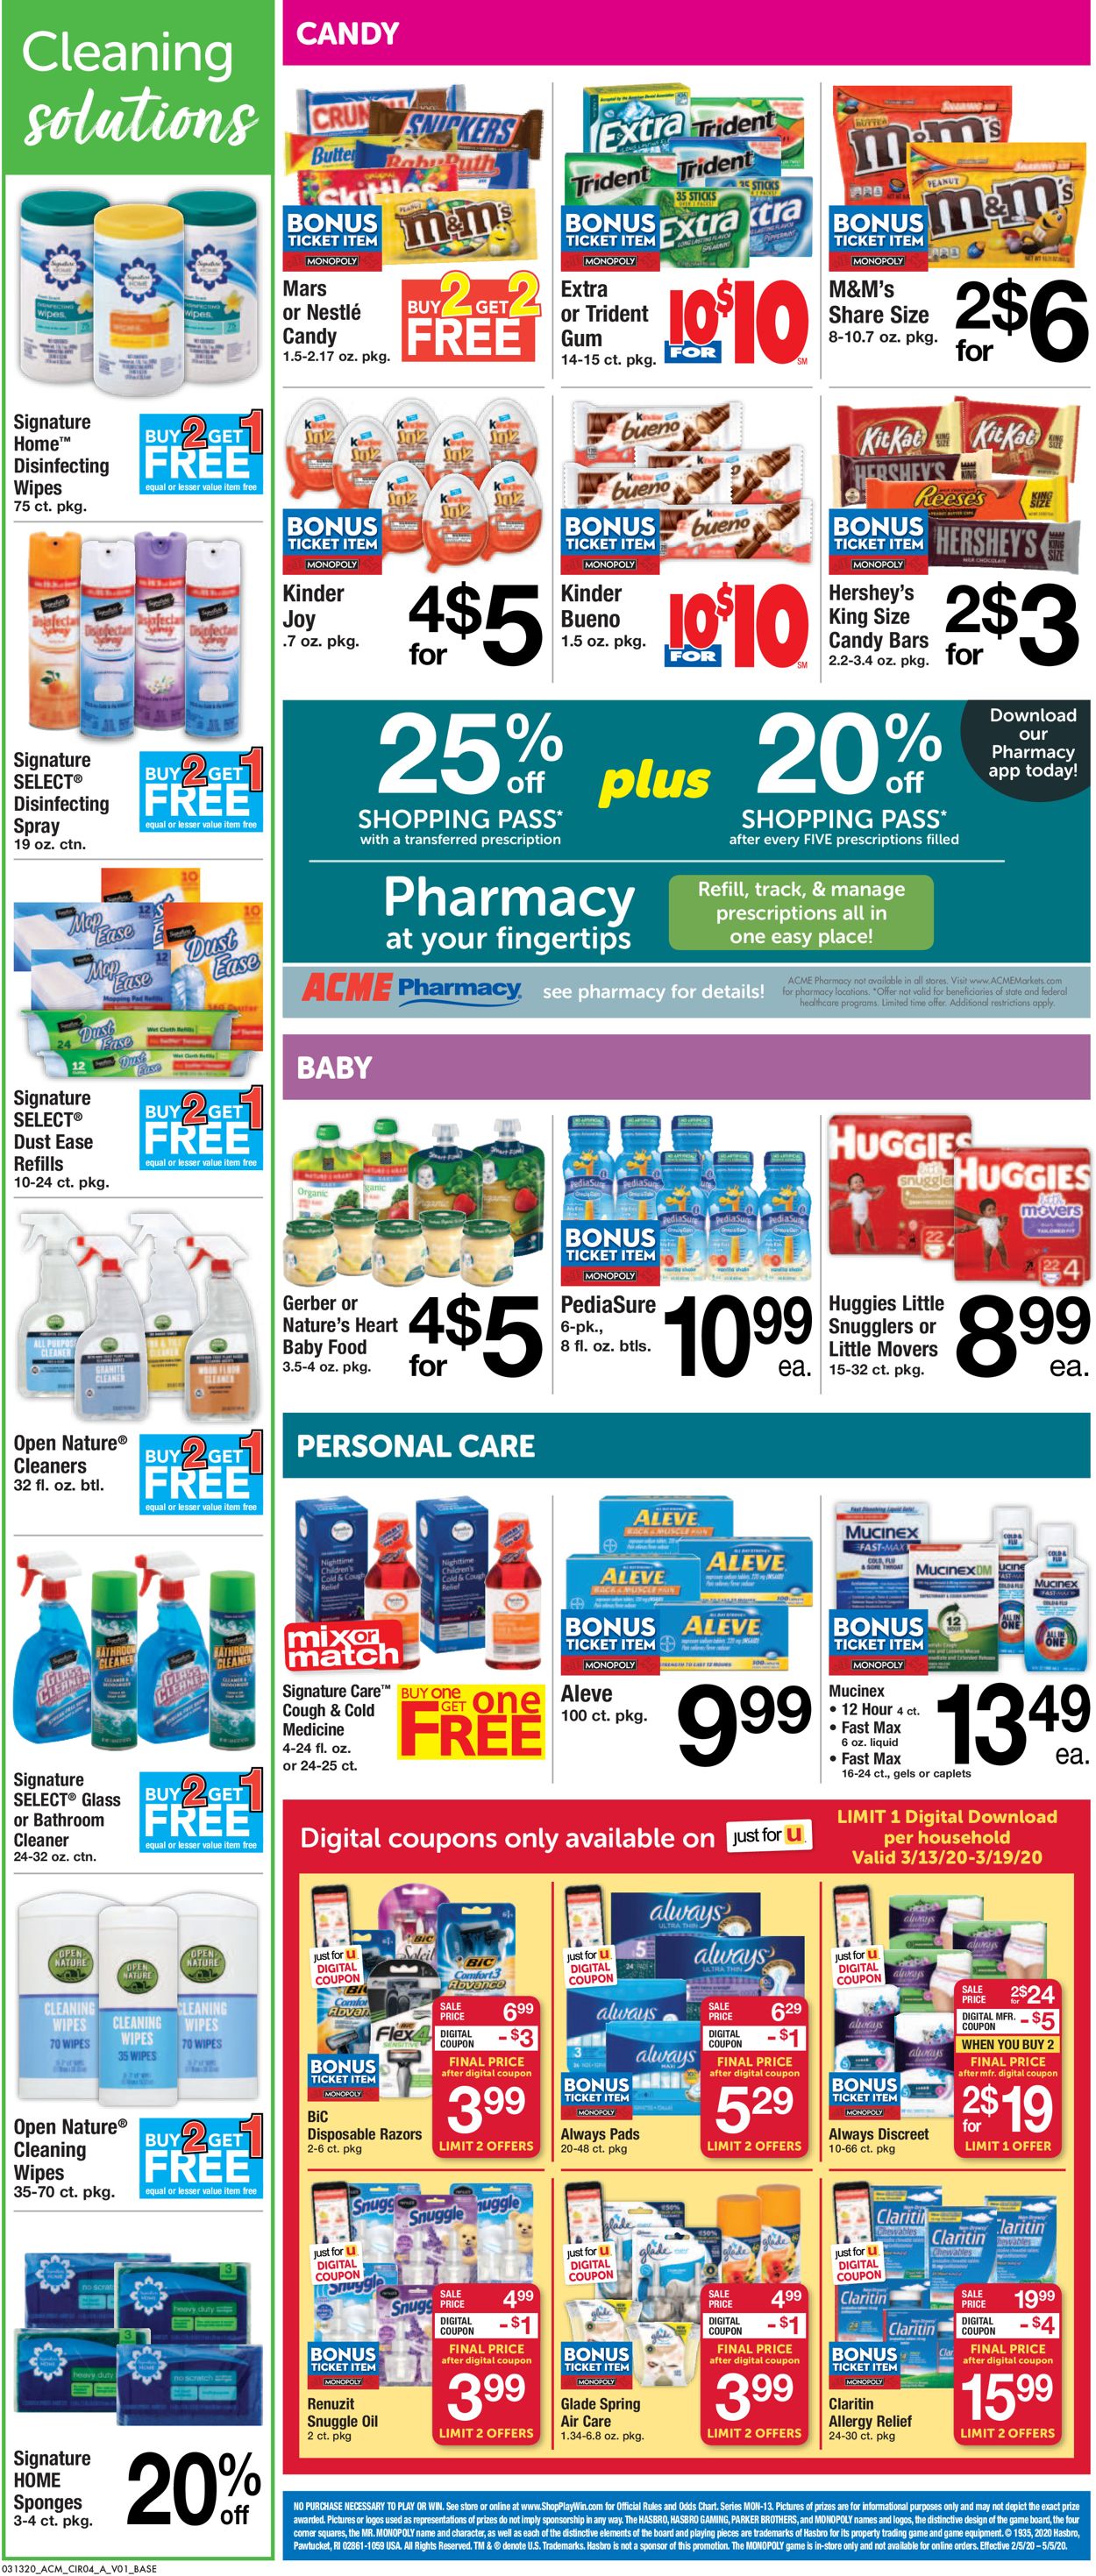 Acme Ad from 03/13/2020